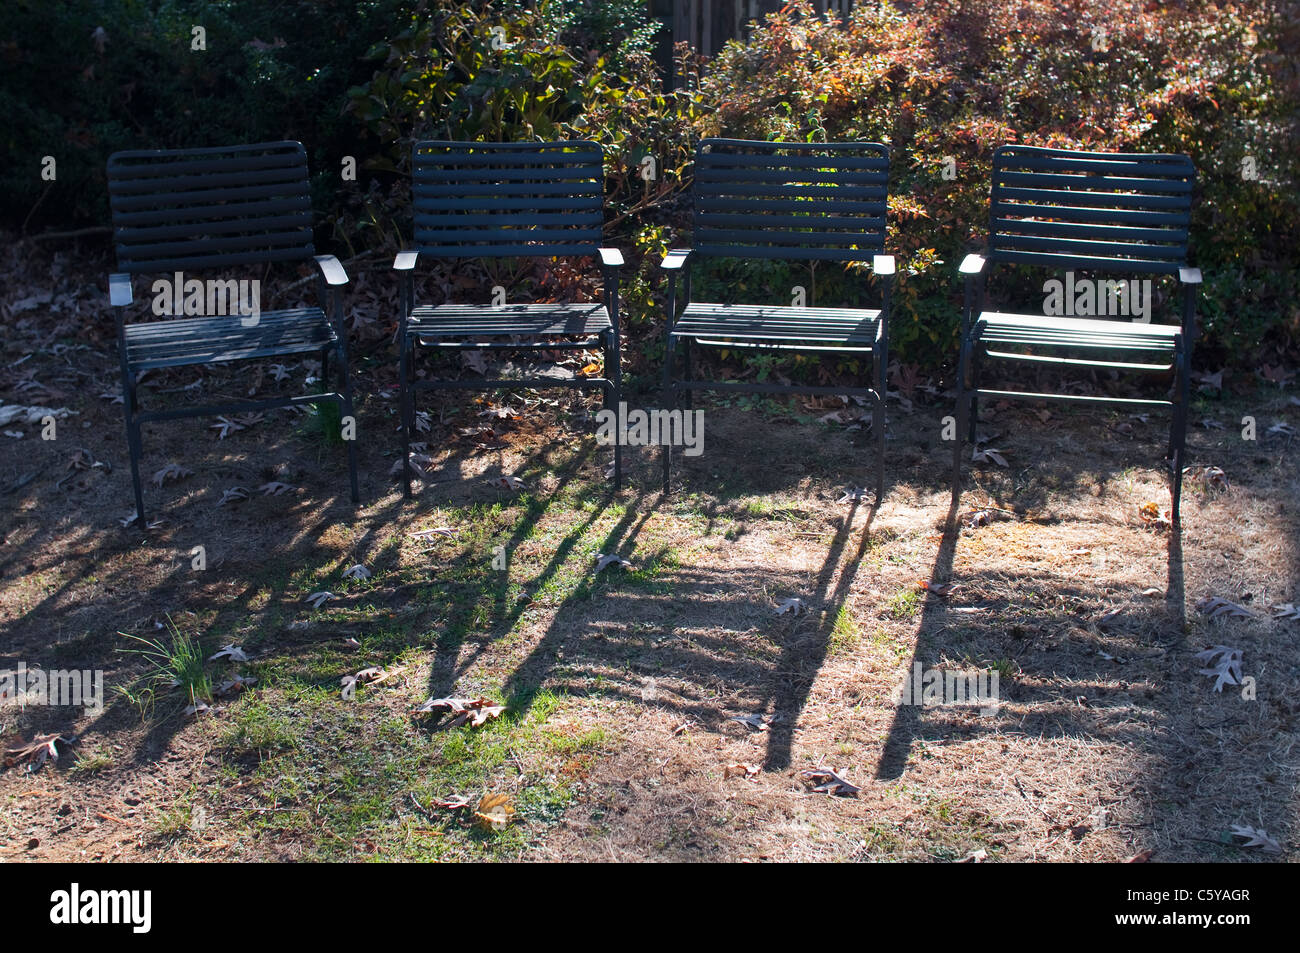 Four garden chairs standing in the Fall afternoon sun in a yard / garden in New Jersey, USA. Stock Photo